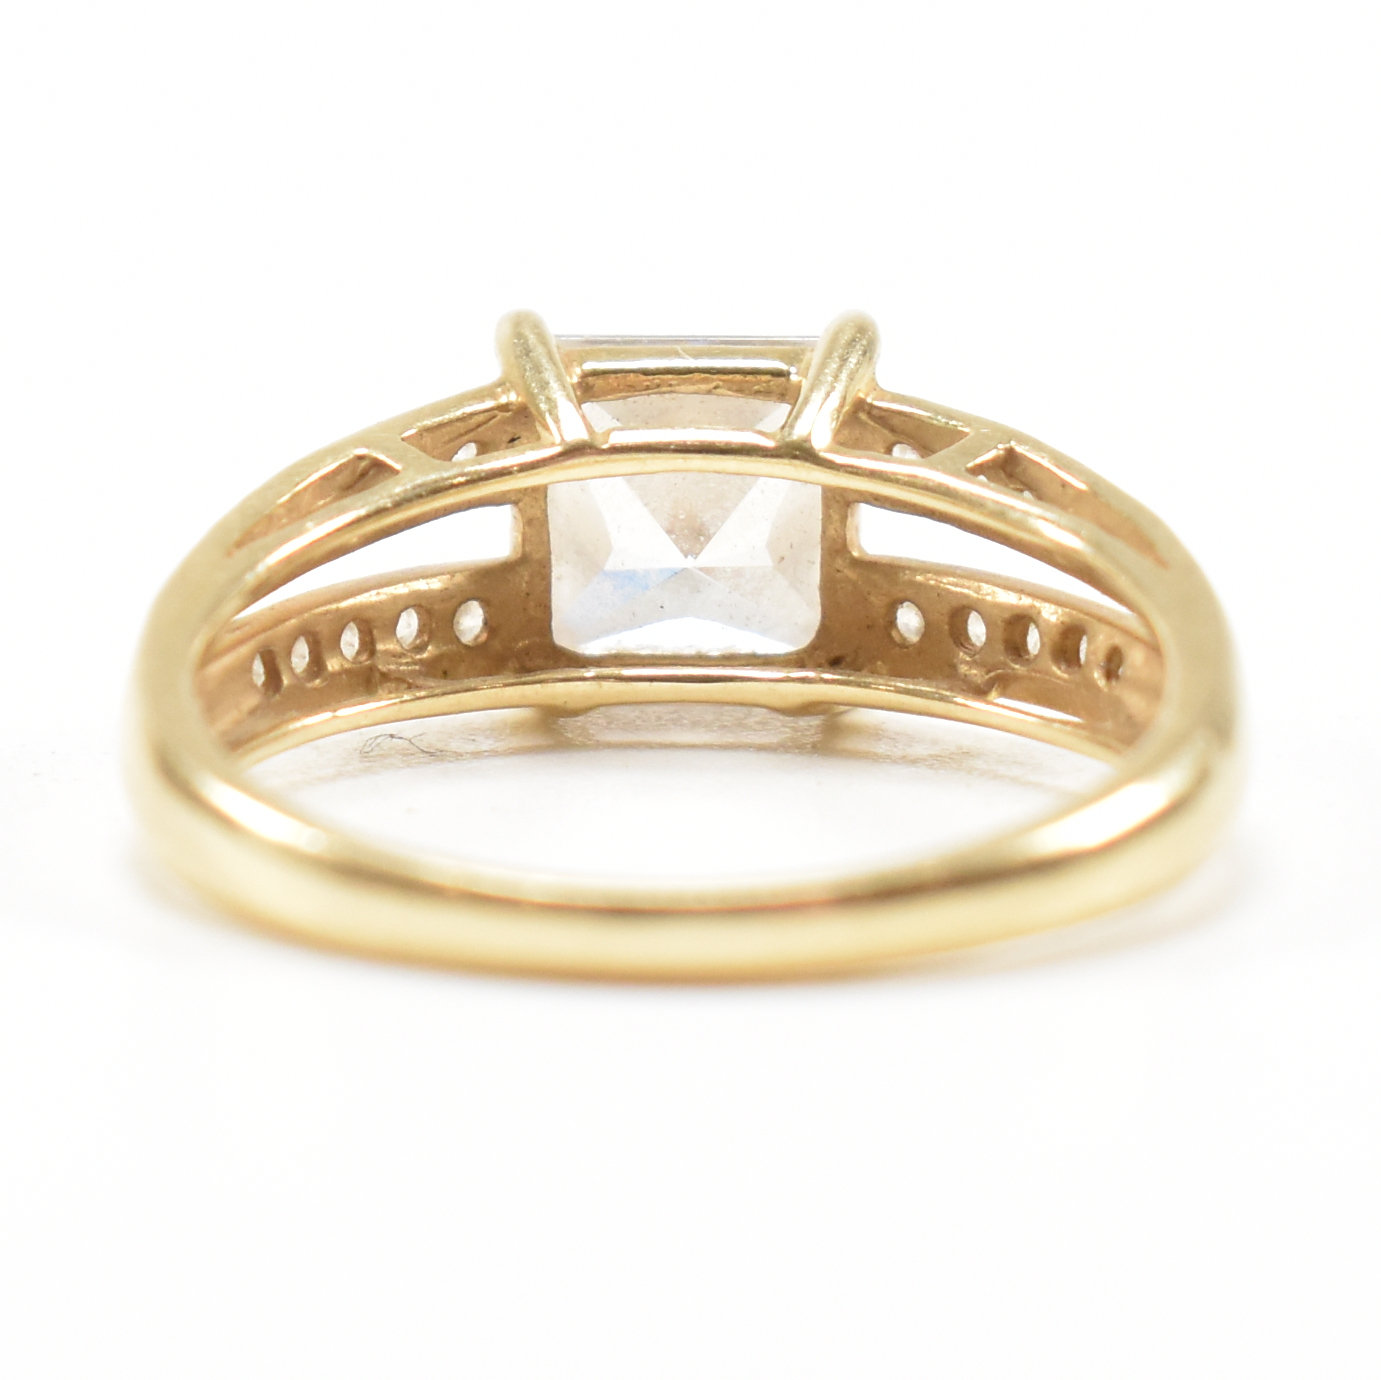 HALLMARKED 14CT GOLD & CUBIC ZIRCONIA RING - Image 6 of 9